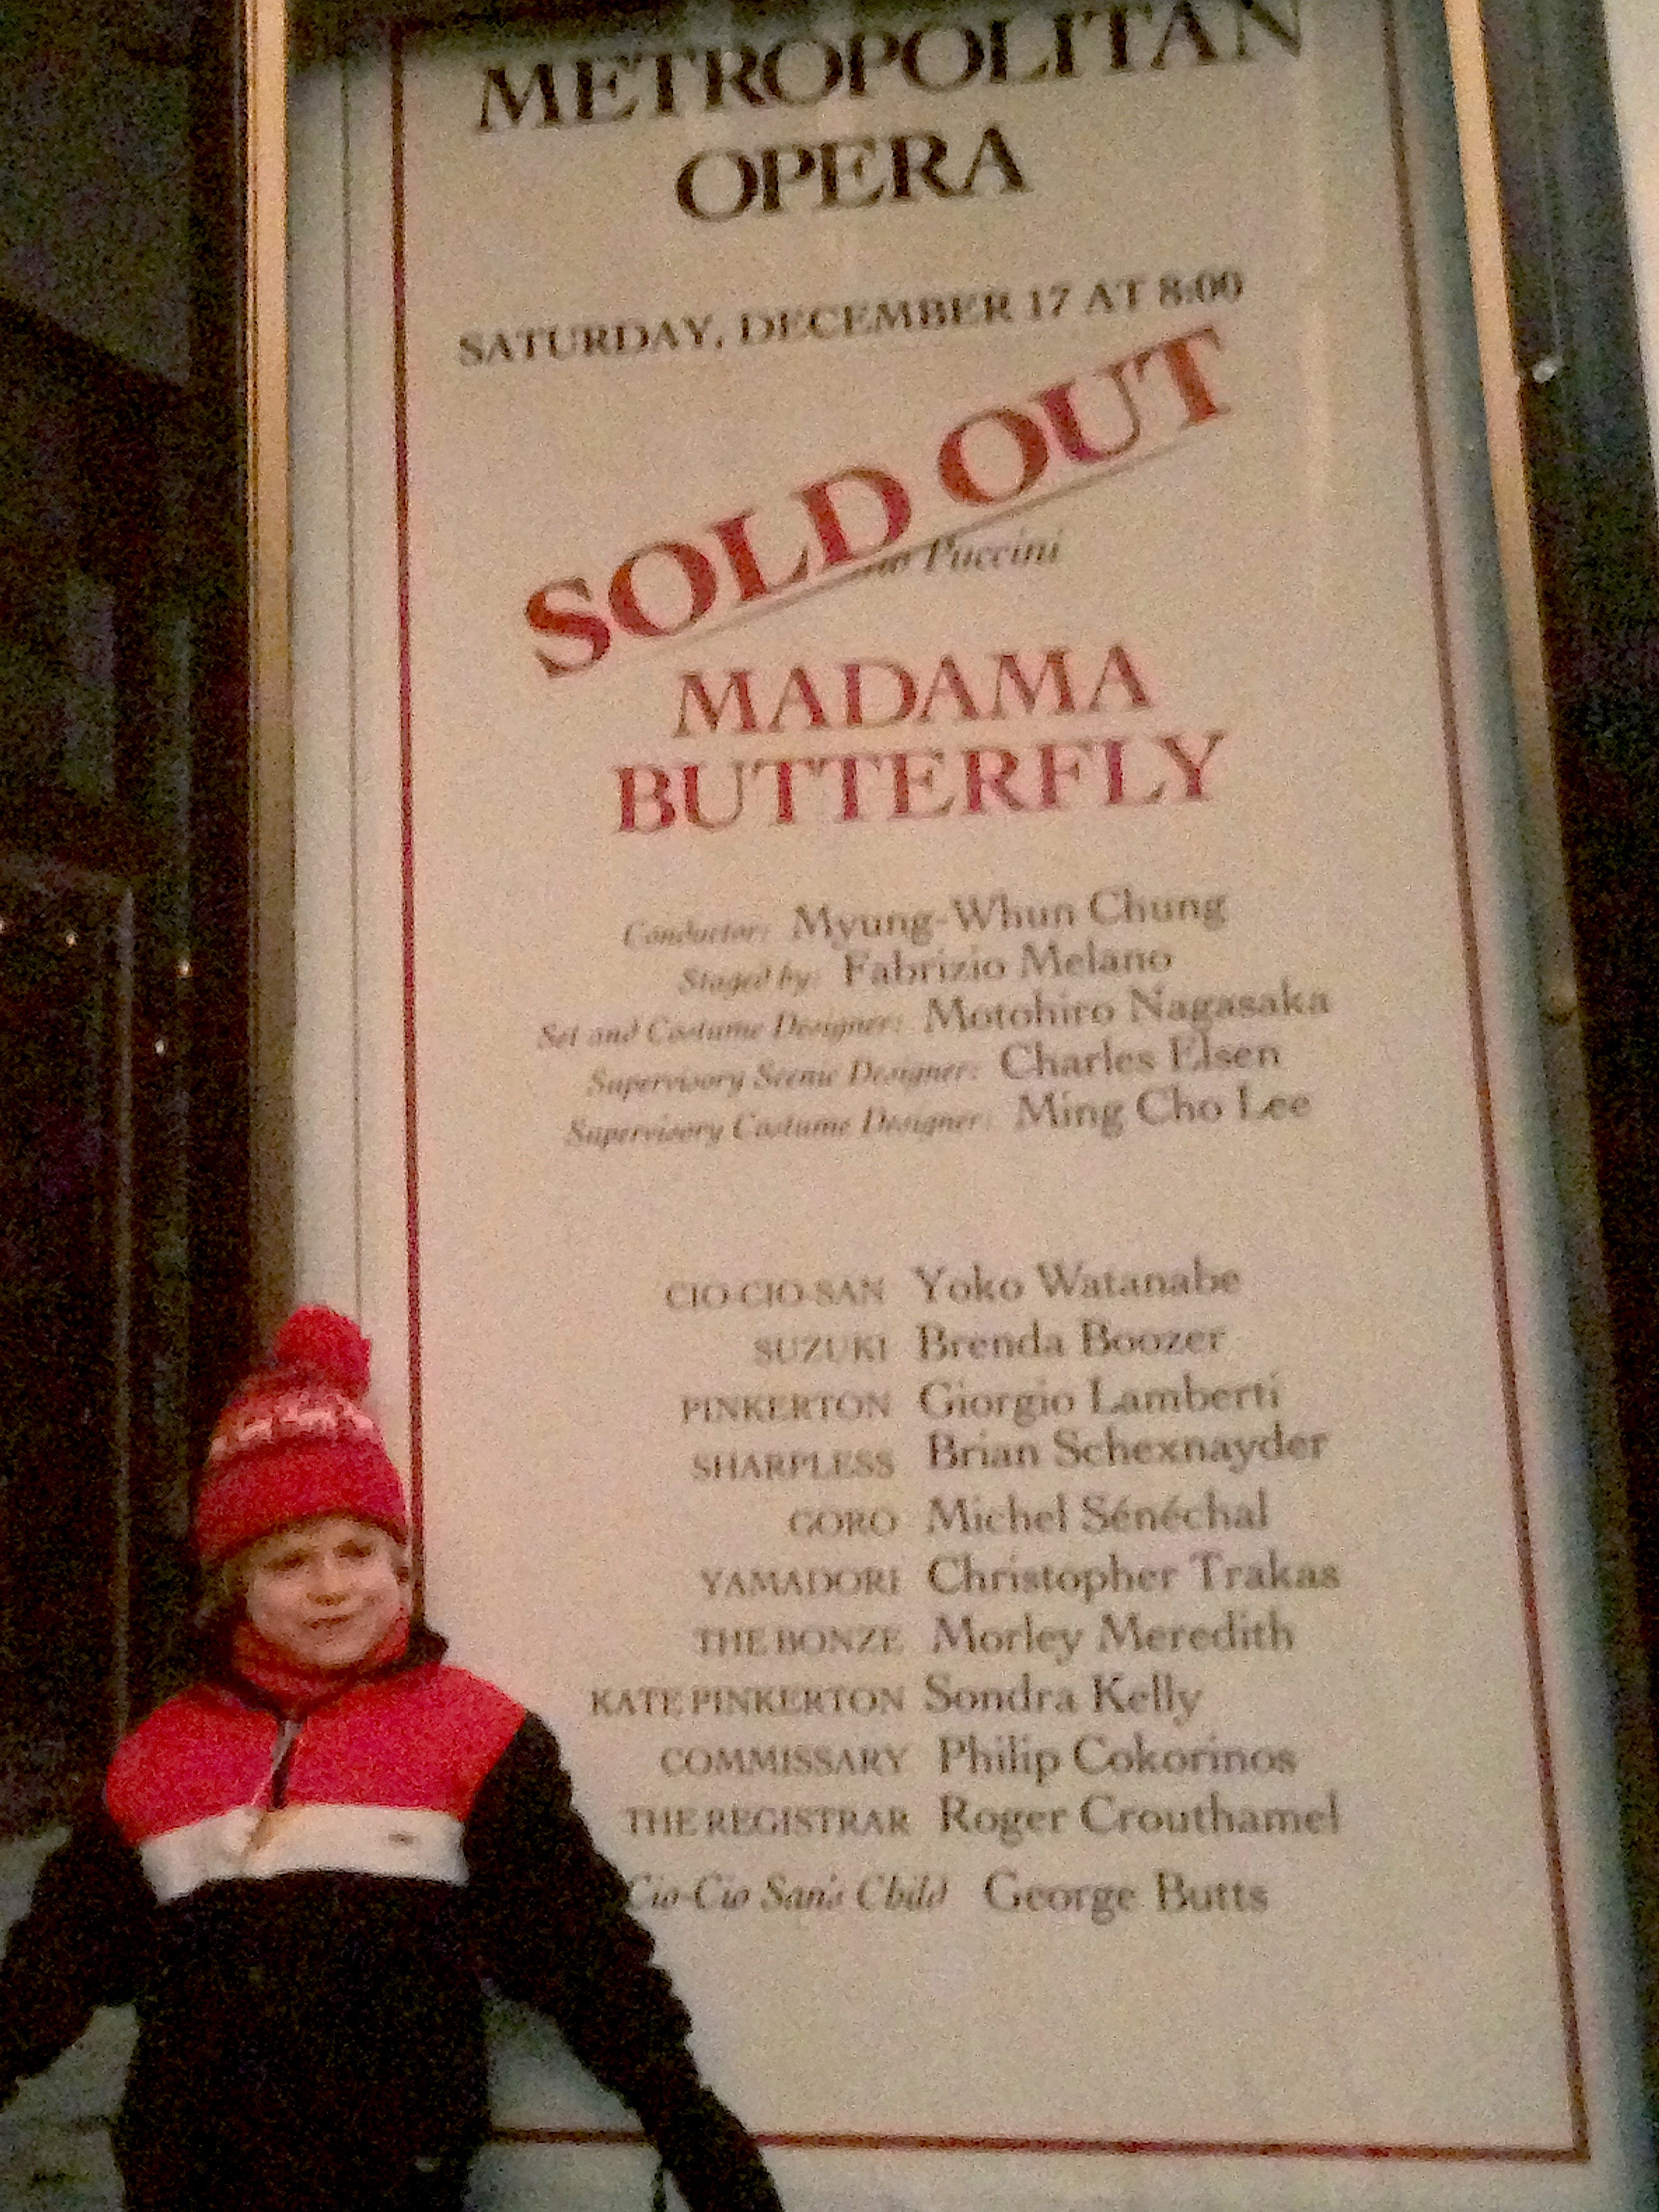 Outside the Met before a performance of Madama Butterfly